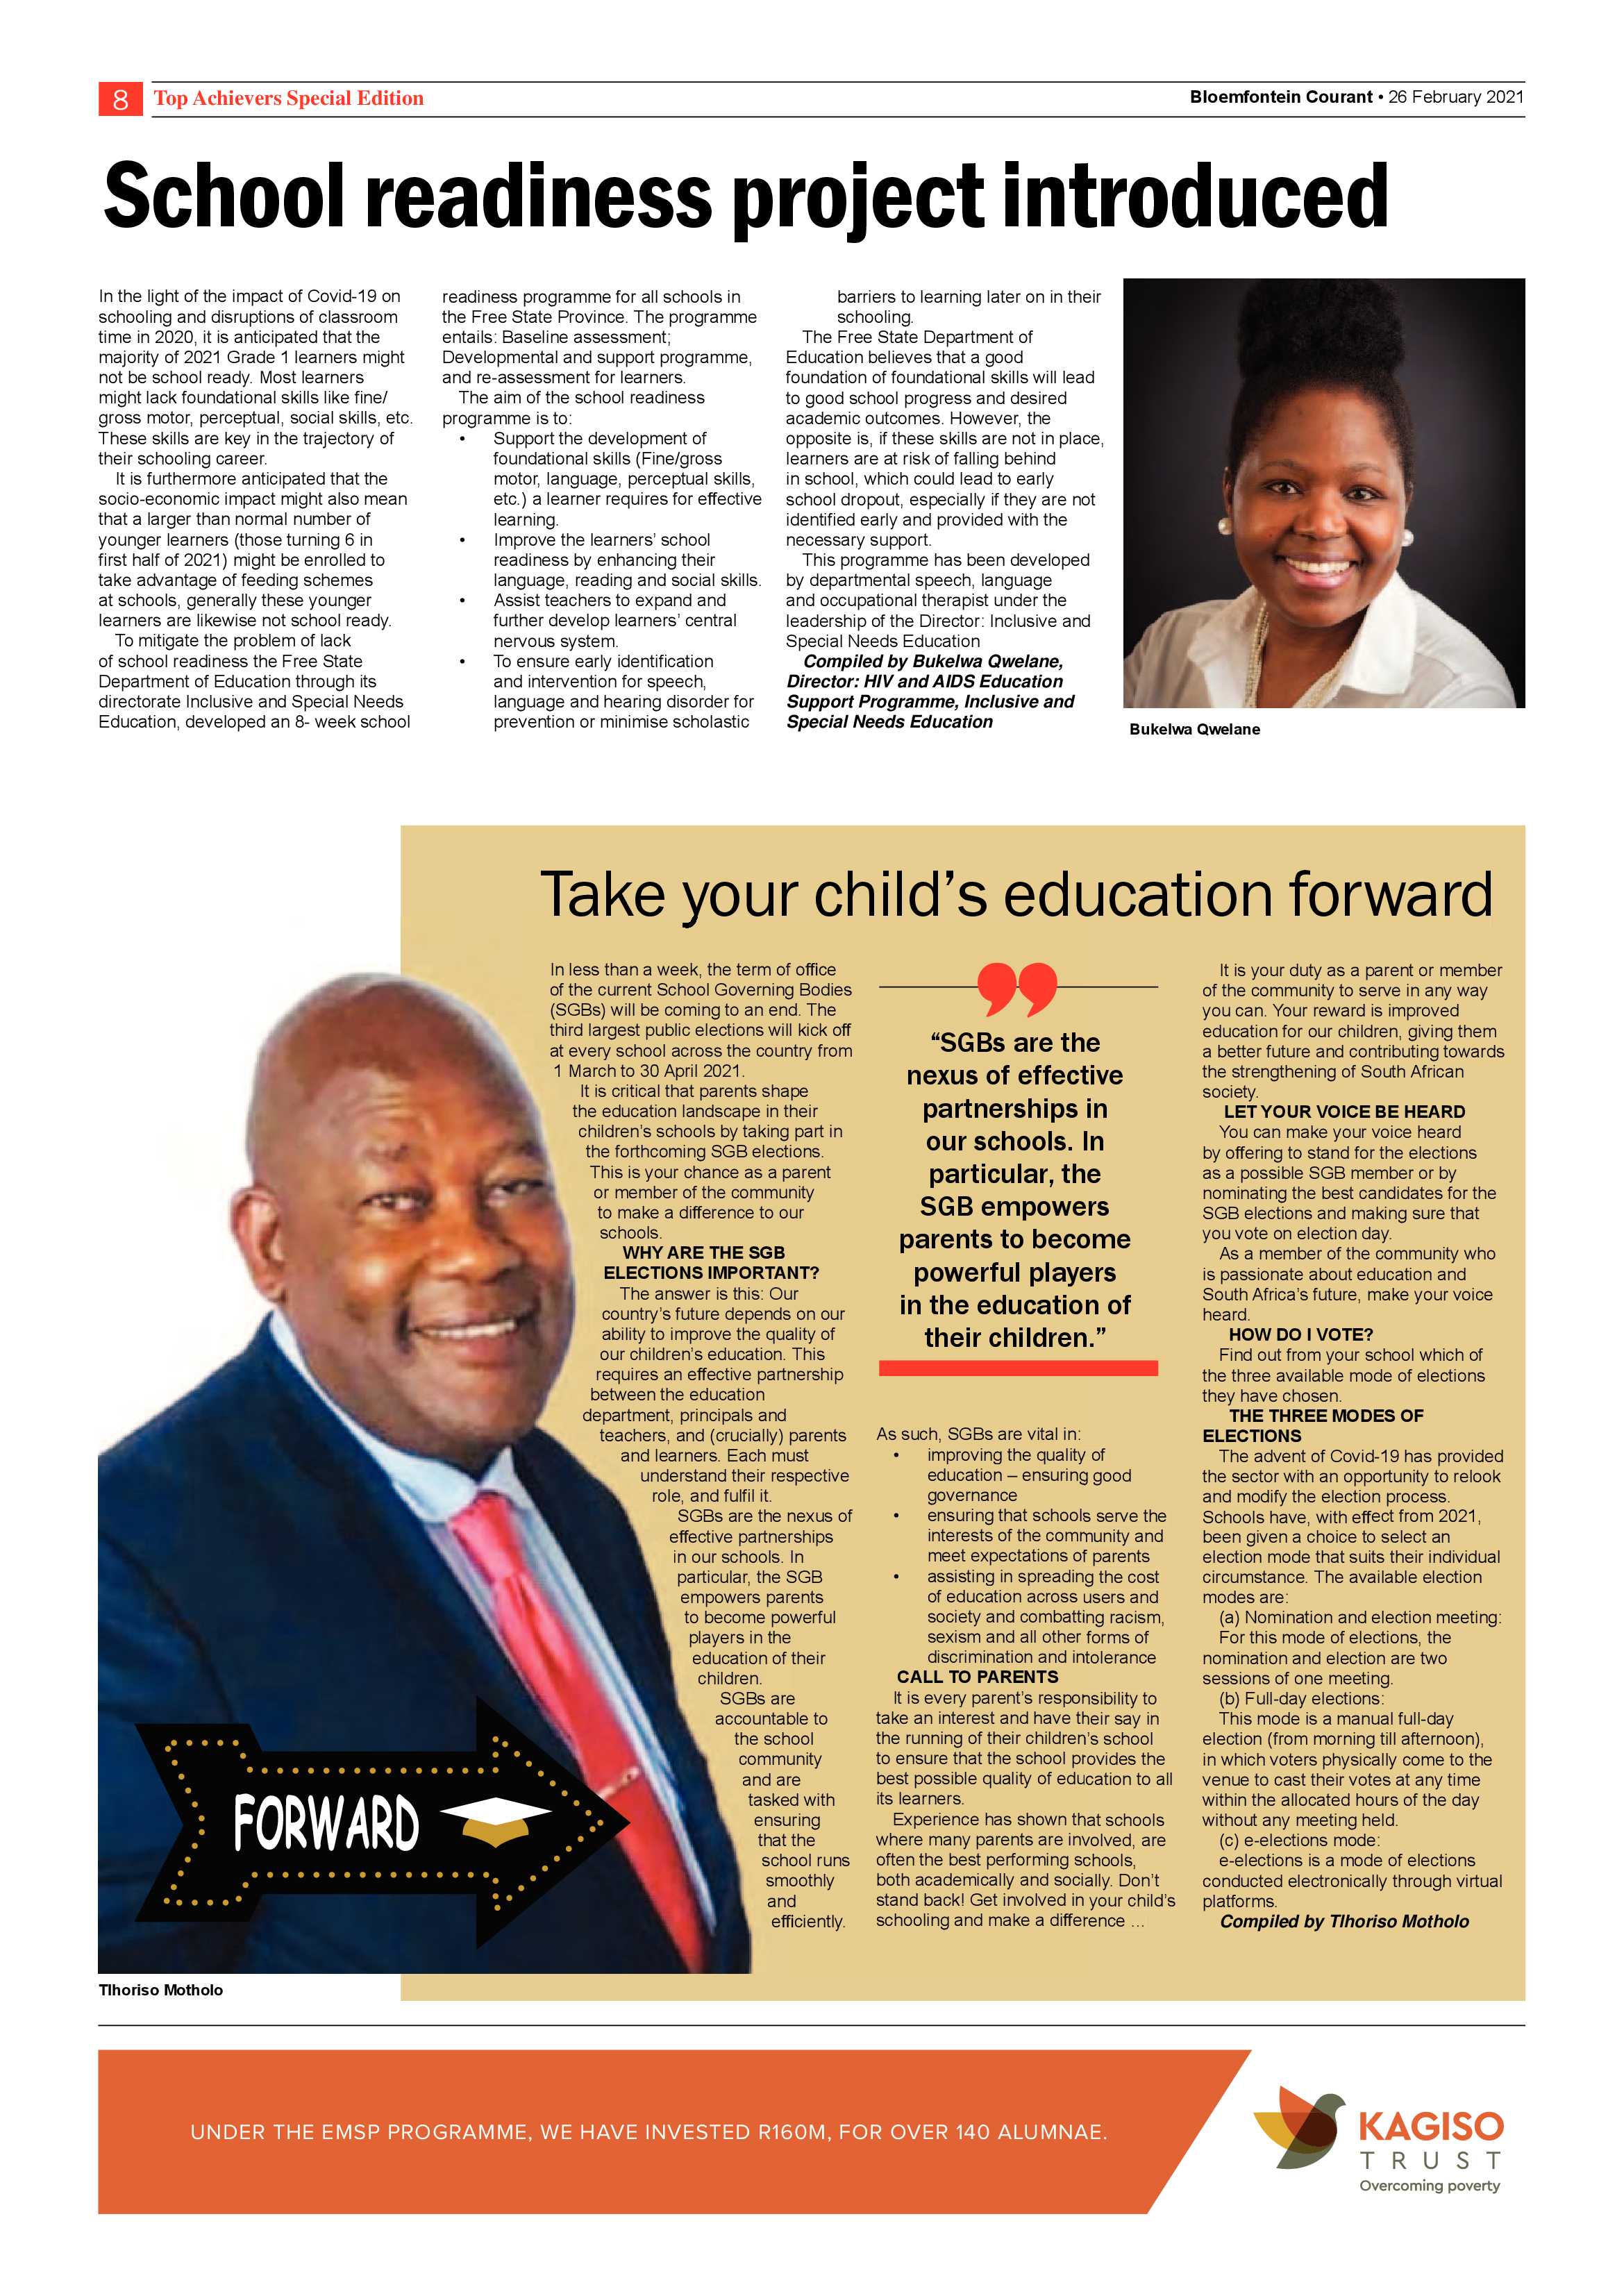 bloemfontein-courant-special-top-achievers-epapers-page-8